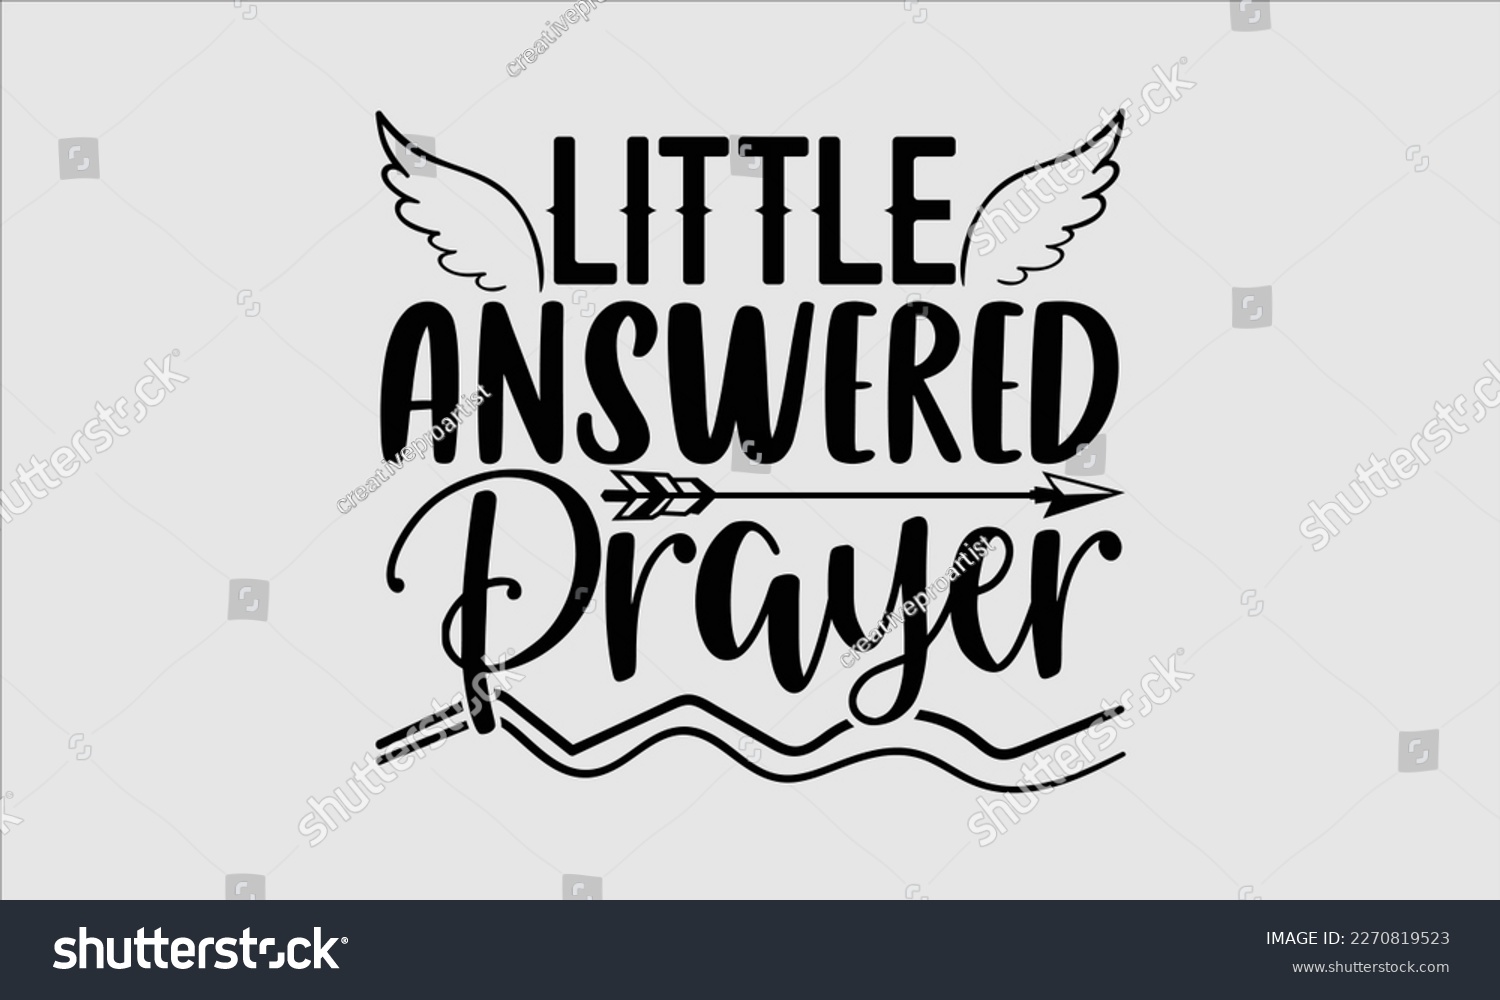 SVG of Little answered prayer- Baby T shirt design, Lettering svg for greeting banners, Modern calligraphy, Vector EPS Editable Files, white background, EPS 10. svg